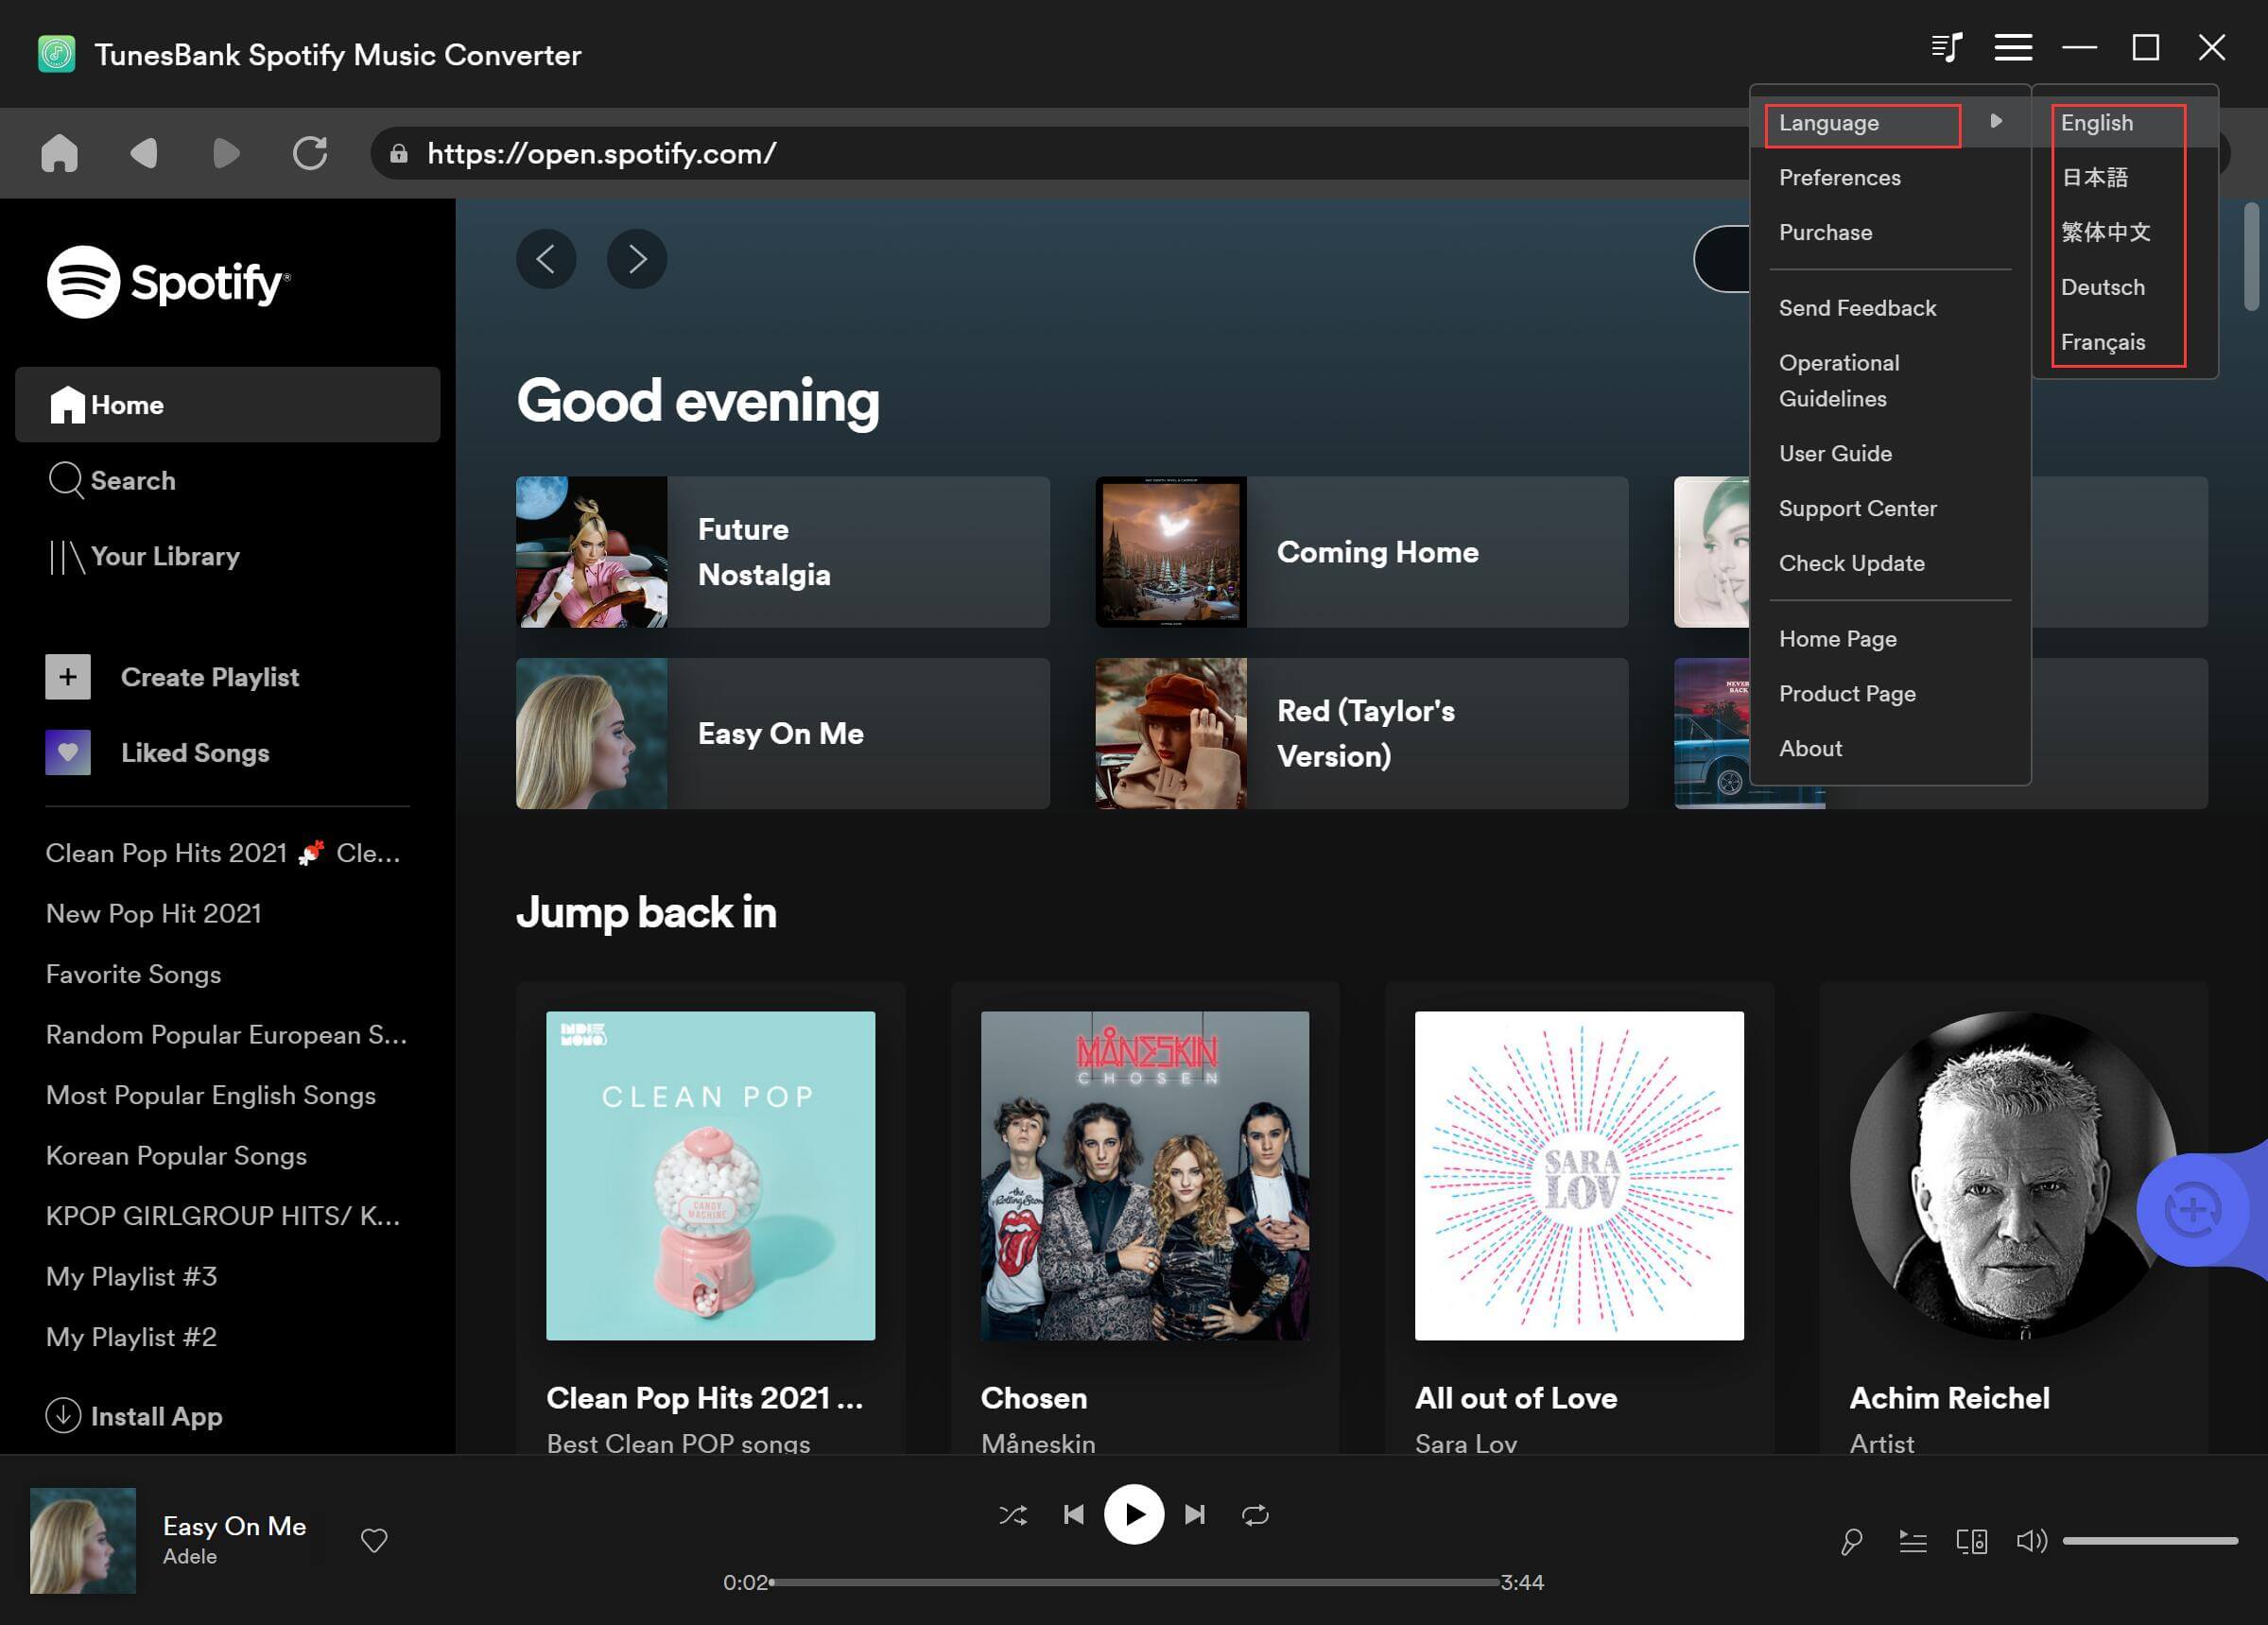 spotify songs convert to mp3